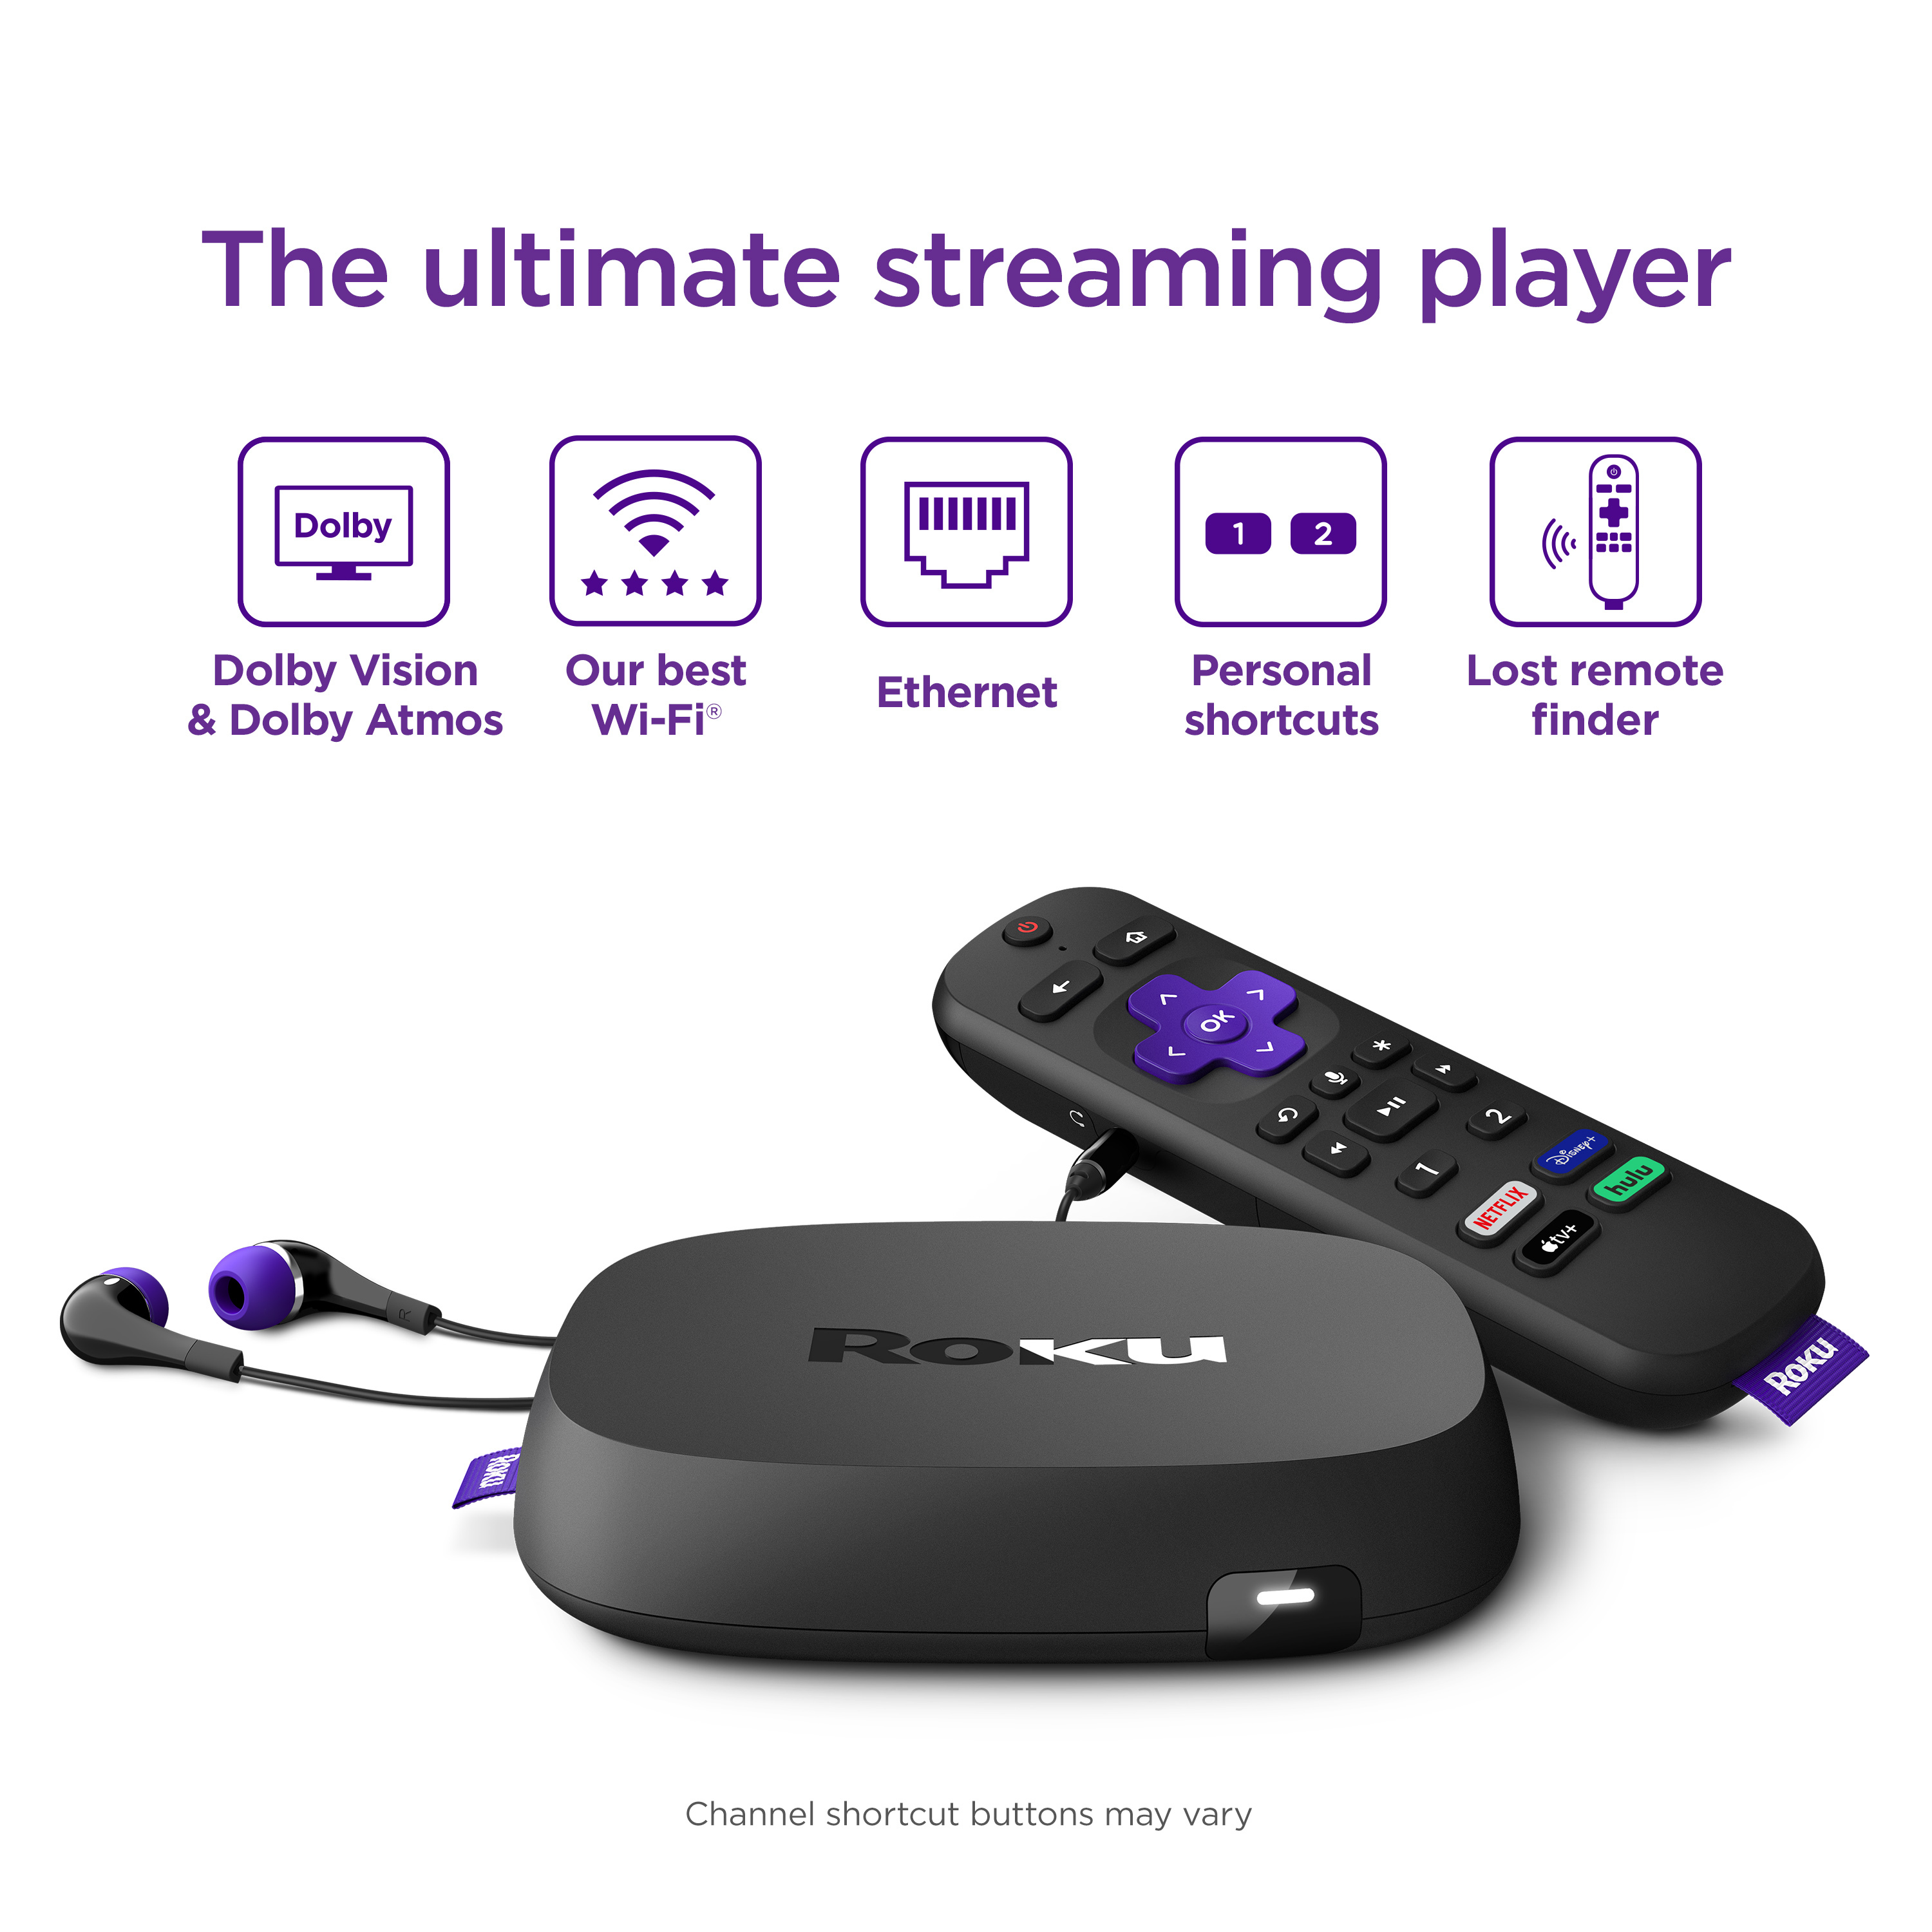 Roku Ultra | Streaming Device 4K/HDR/Dolby Vision, Roku Voice Remote with Headphone Jack, Premium HDMI® Cable - image 3 of 16